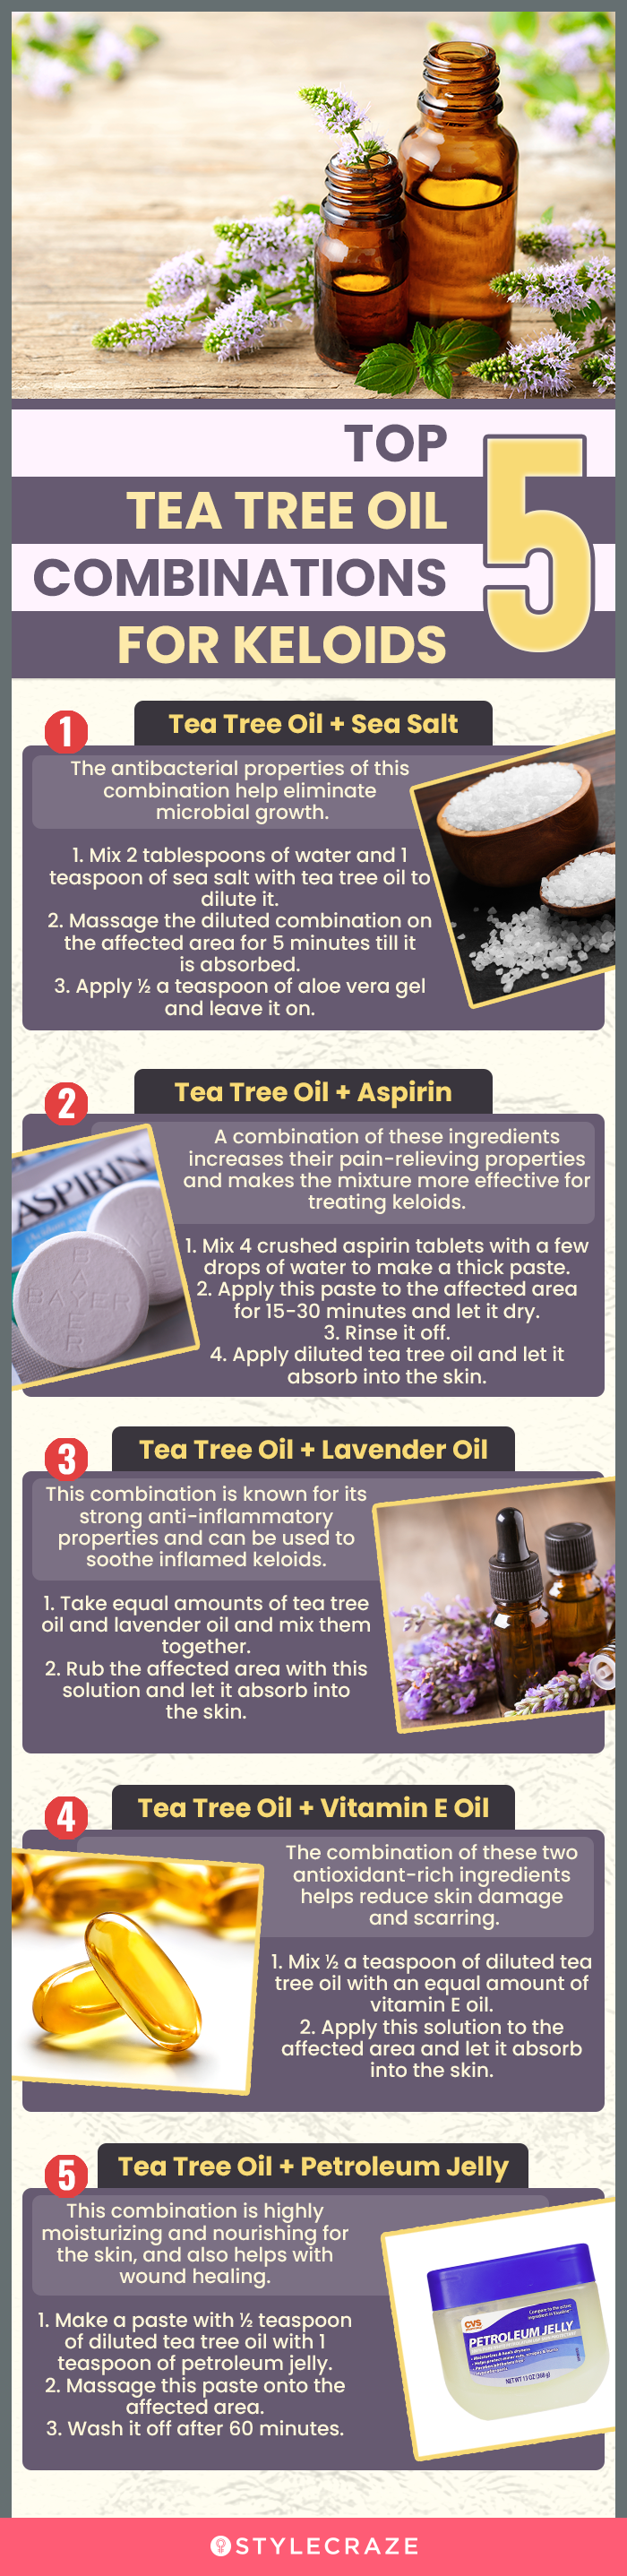 top 5 tea tree oil combinations for keloids (infographic)